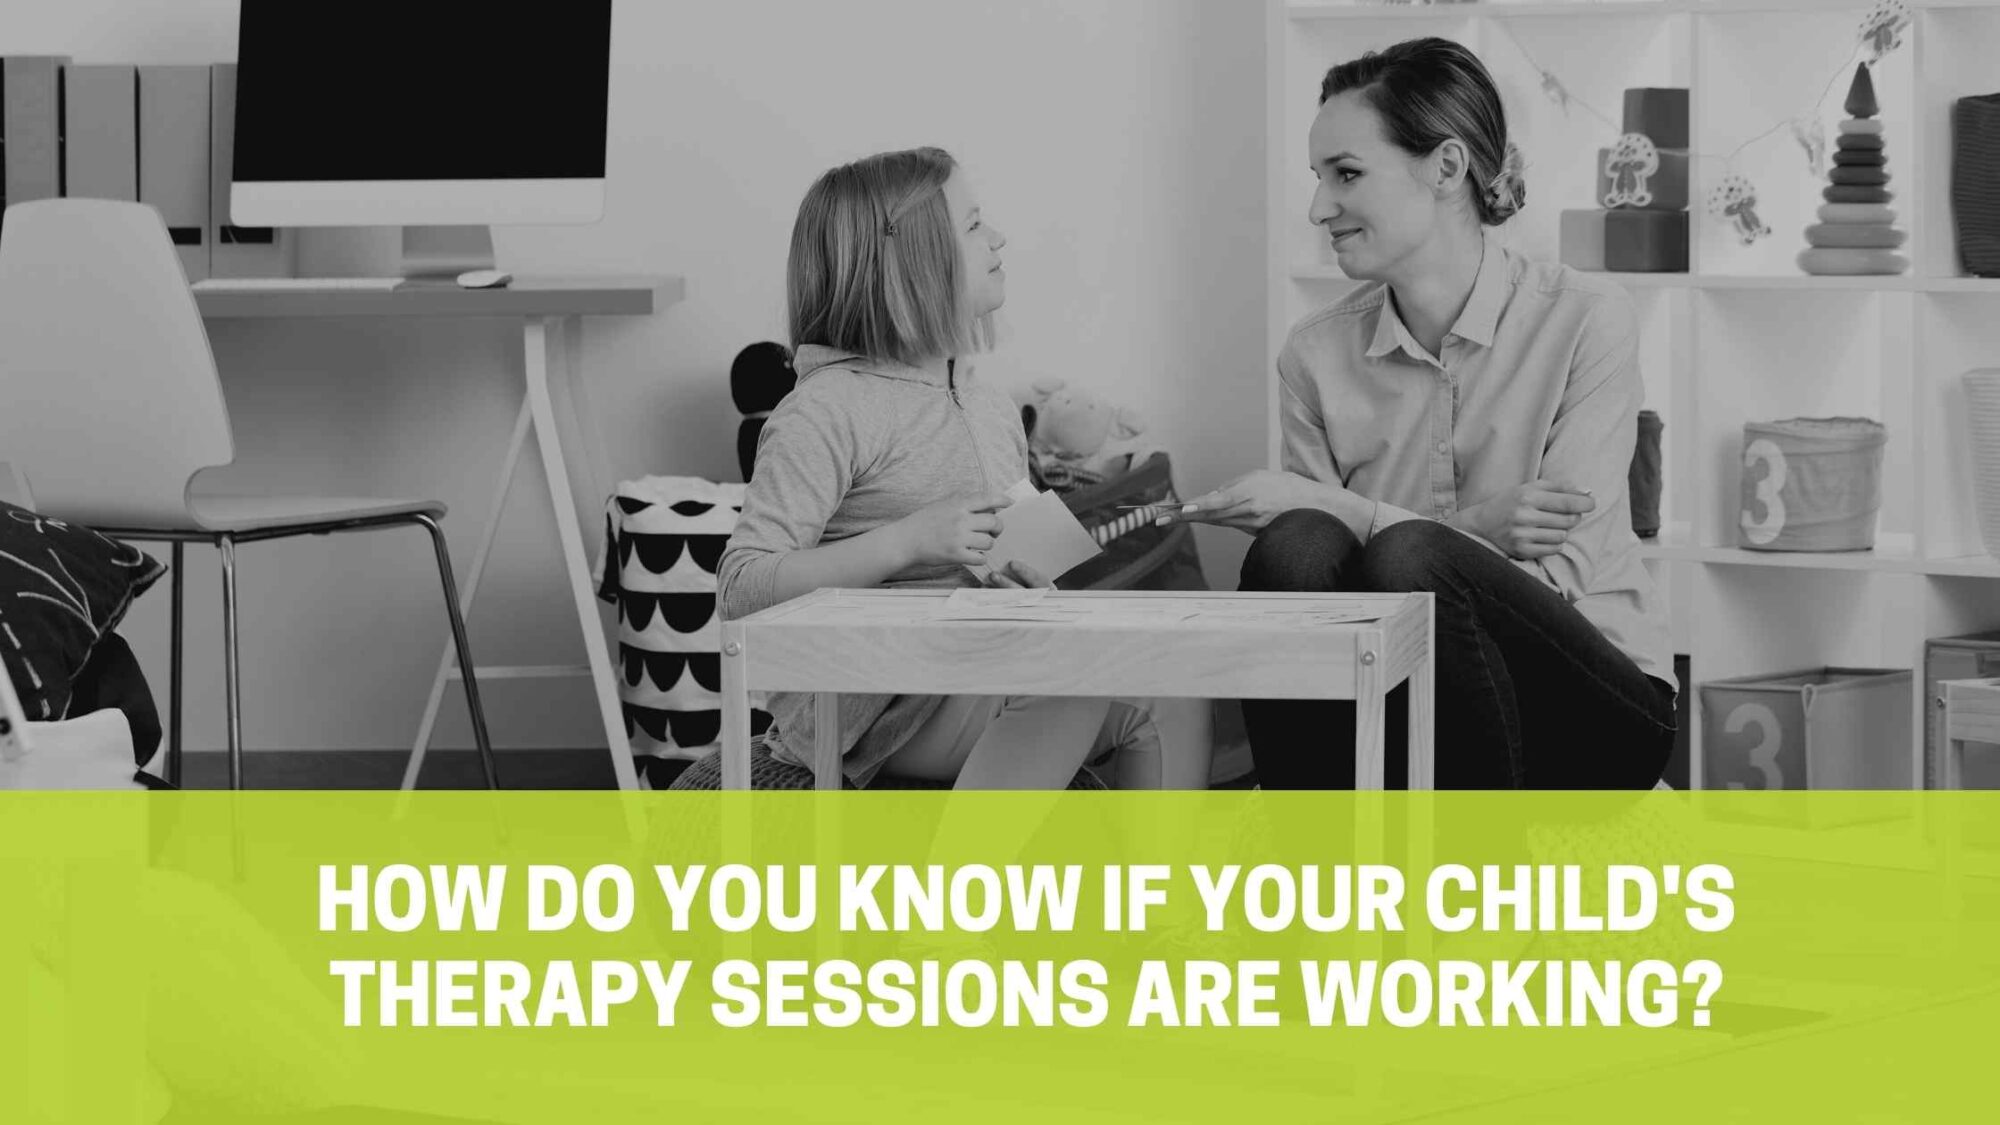 How Do You Know If Your Child's Therapy Sessions Are Working?